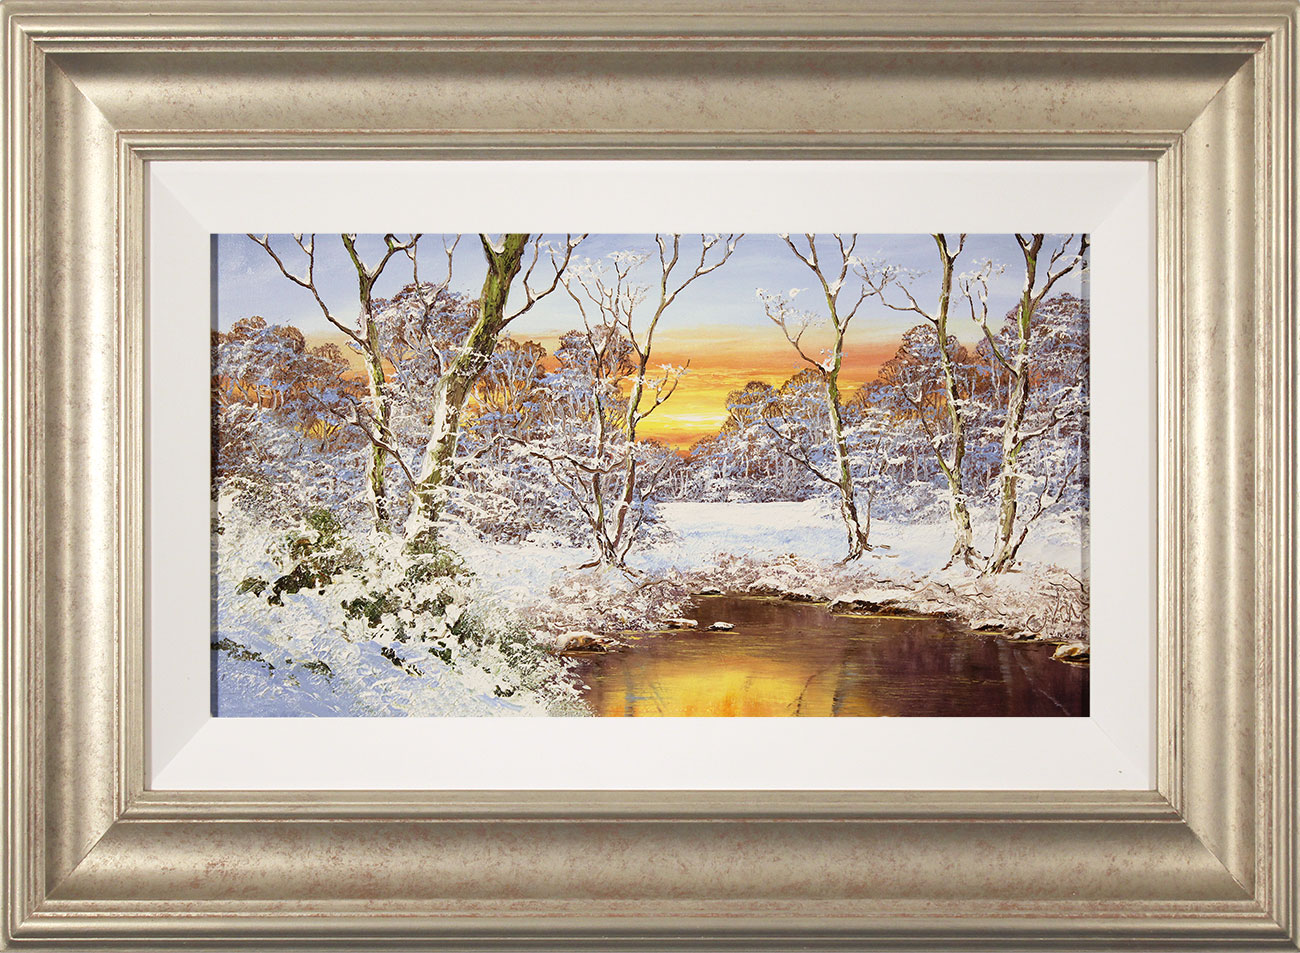 Terry Evans, Original oil painting on canvas, Winter Woodland Click to enlarge